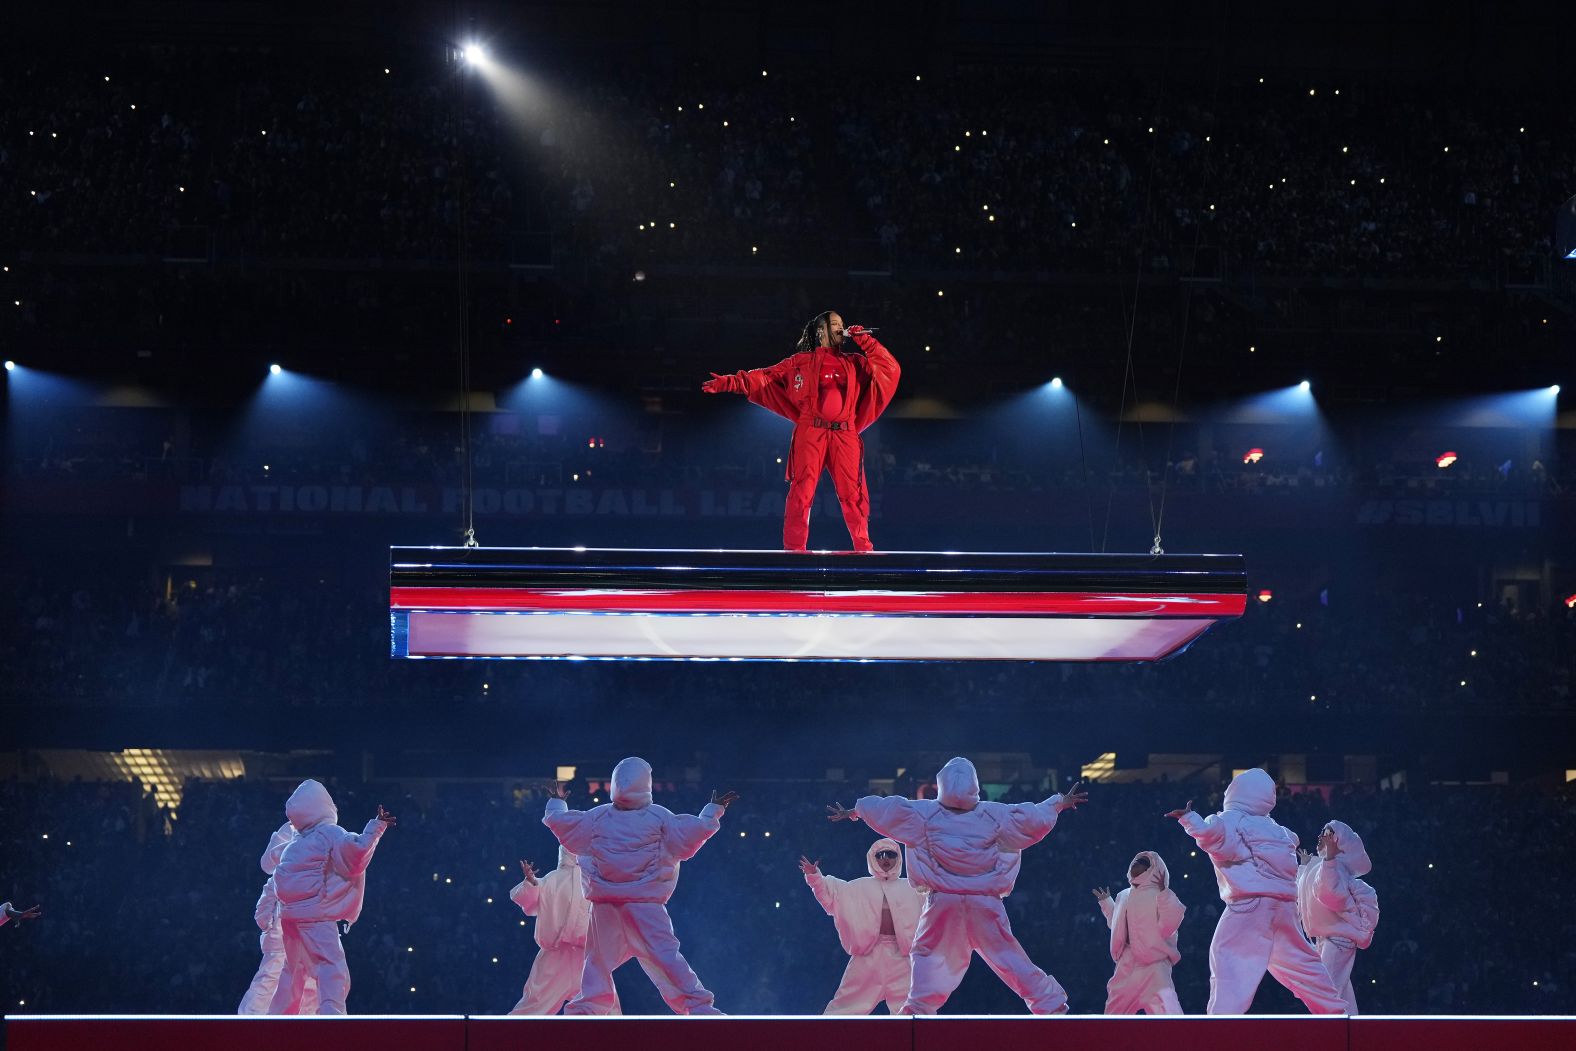 Rihanna performs during the Super Bowl halftime show in 2023. She opened the show by hanging high above the field on a platform. She rubbed her abdomen during her closing song, sparking speculation that she might be expecting. After the performance, a Rihanna representative confirmed that she was pregnant.